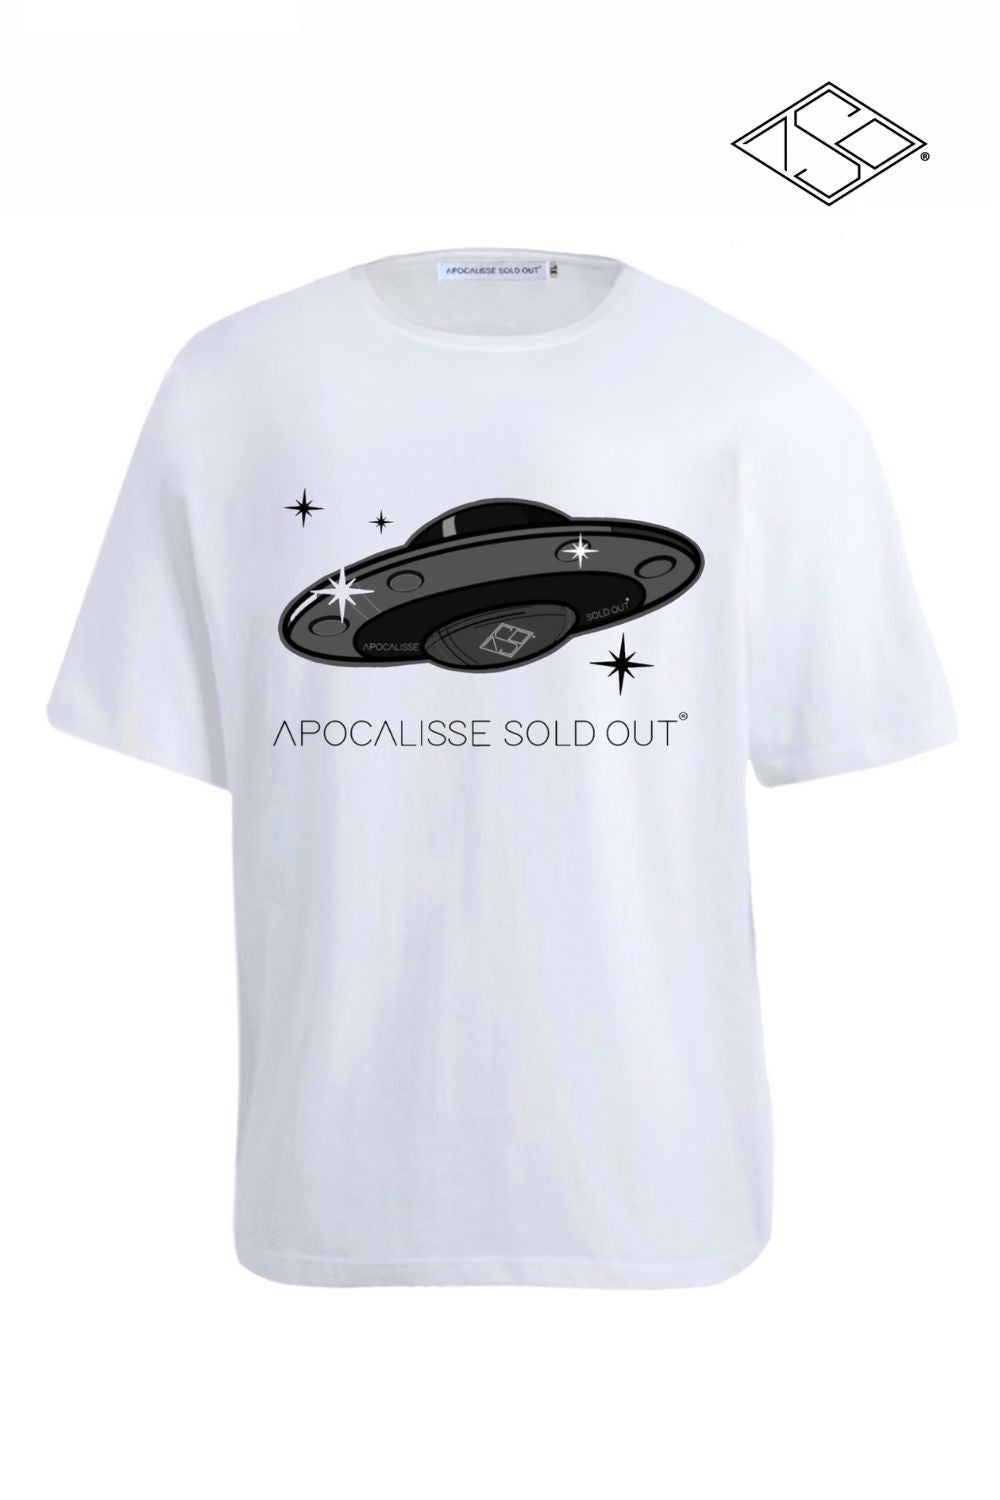 Apocalisse TSHIRT UFO by ApocalisseSoldOut® Fashion Brand